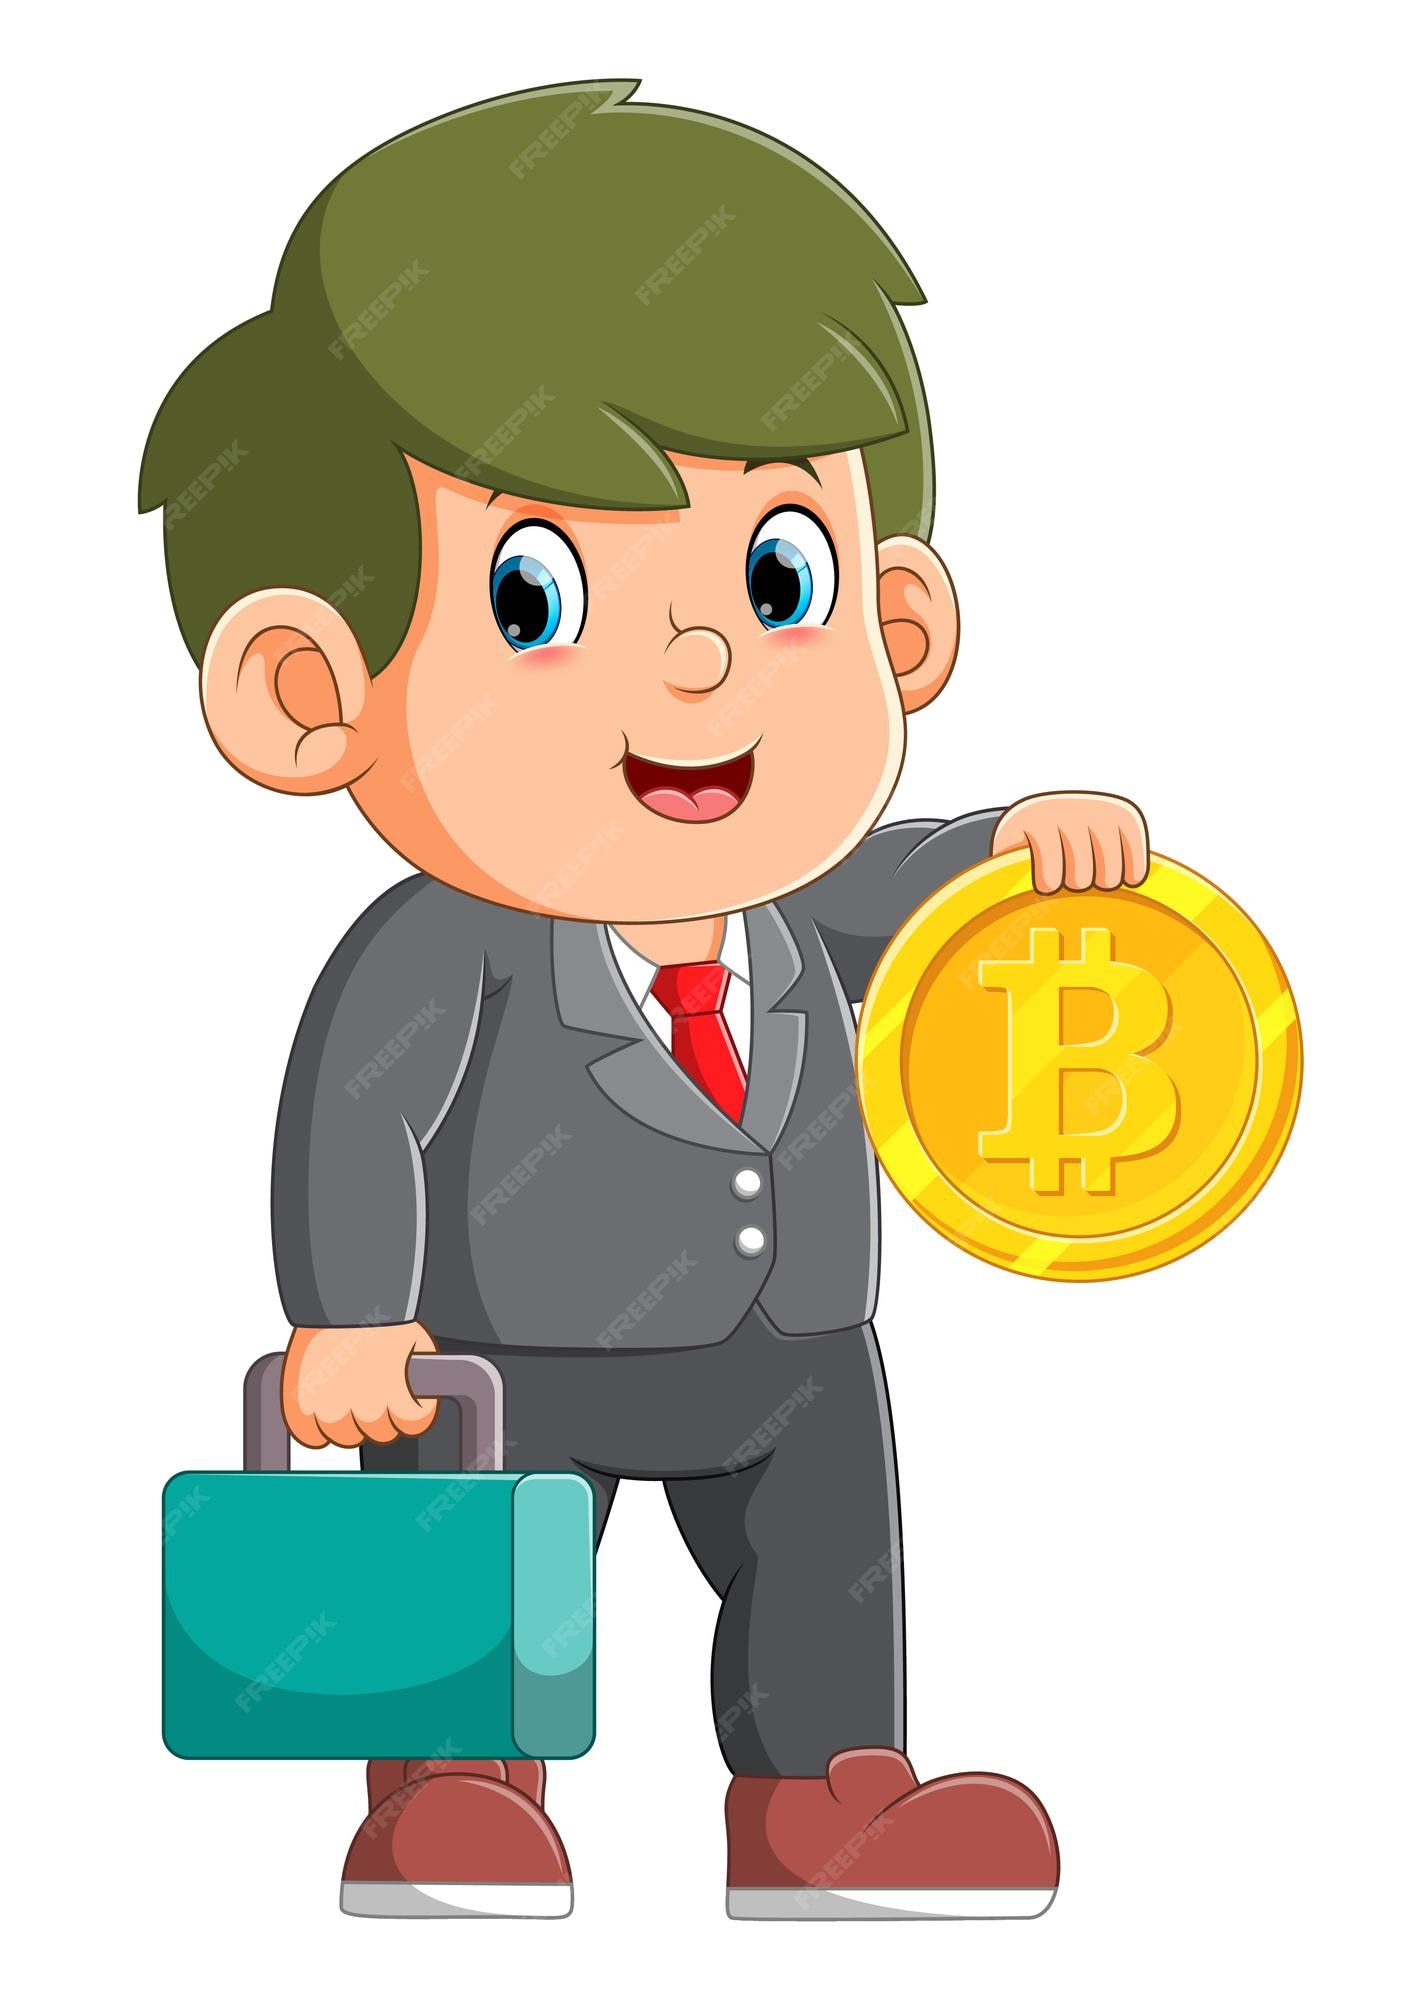 Premium Vector | The office boy is bringing the bitcoin and his bag